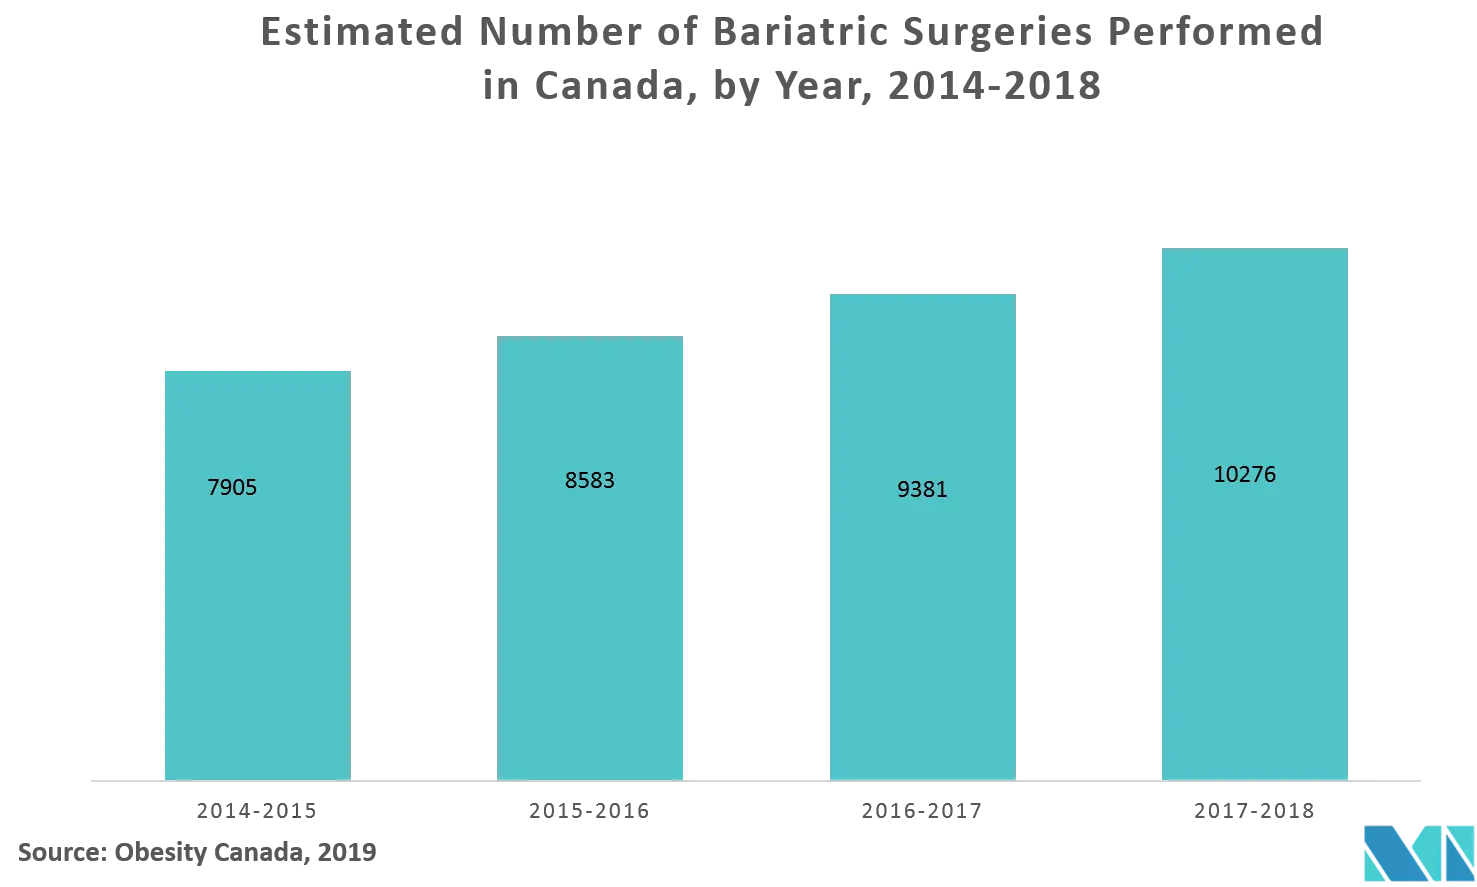 Canada Bariatric Surgery Market : Estimated Number of Bariatric Surgeries Performed in Canada, by Year, 2014-2018